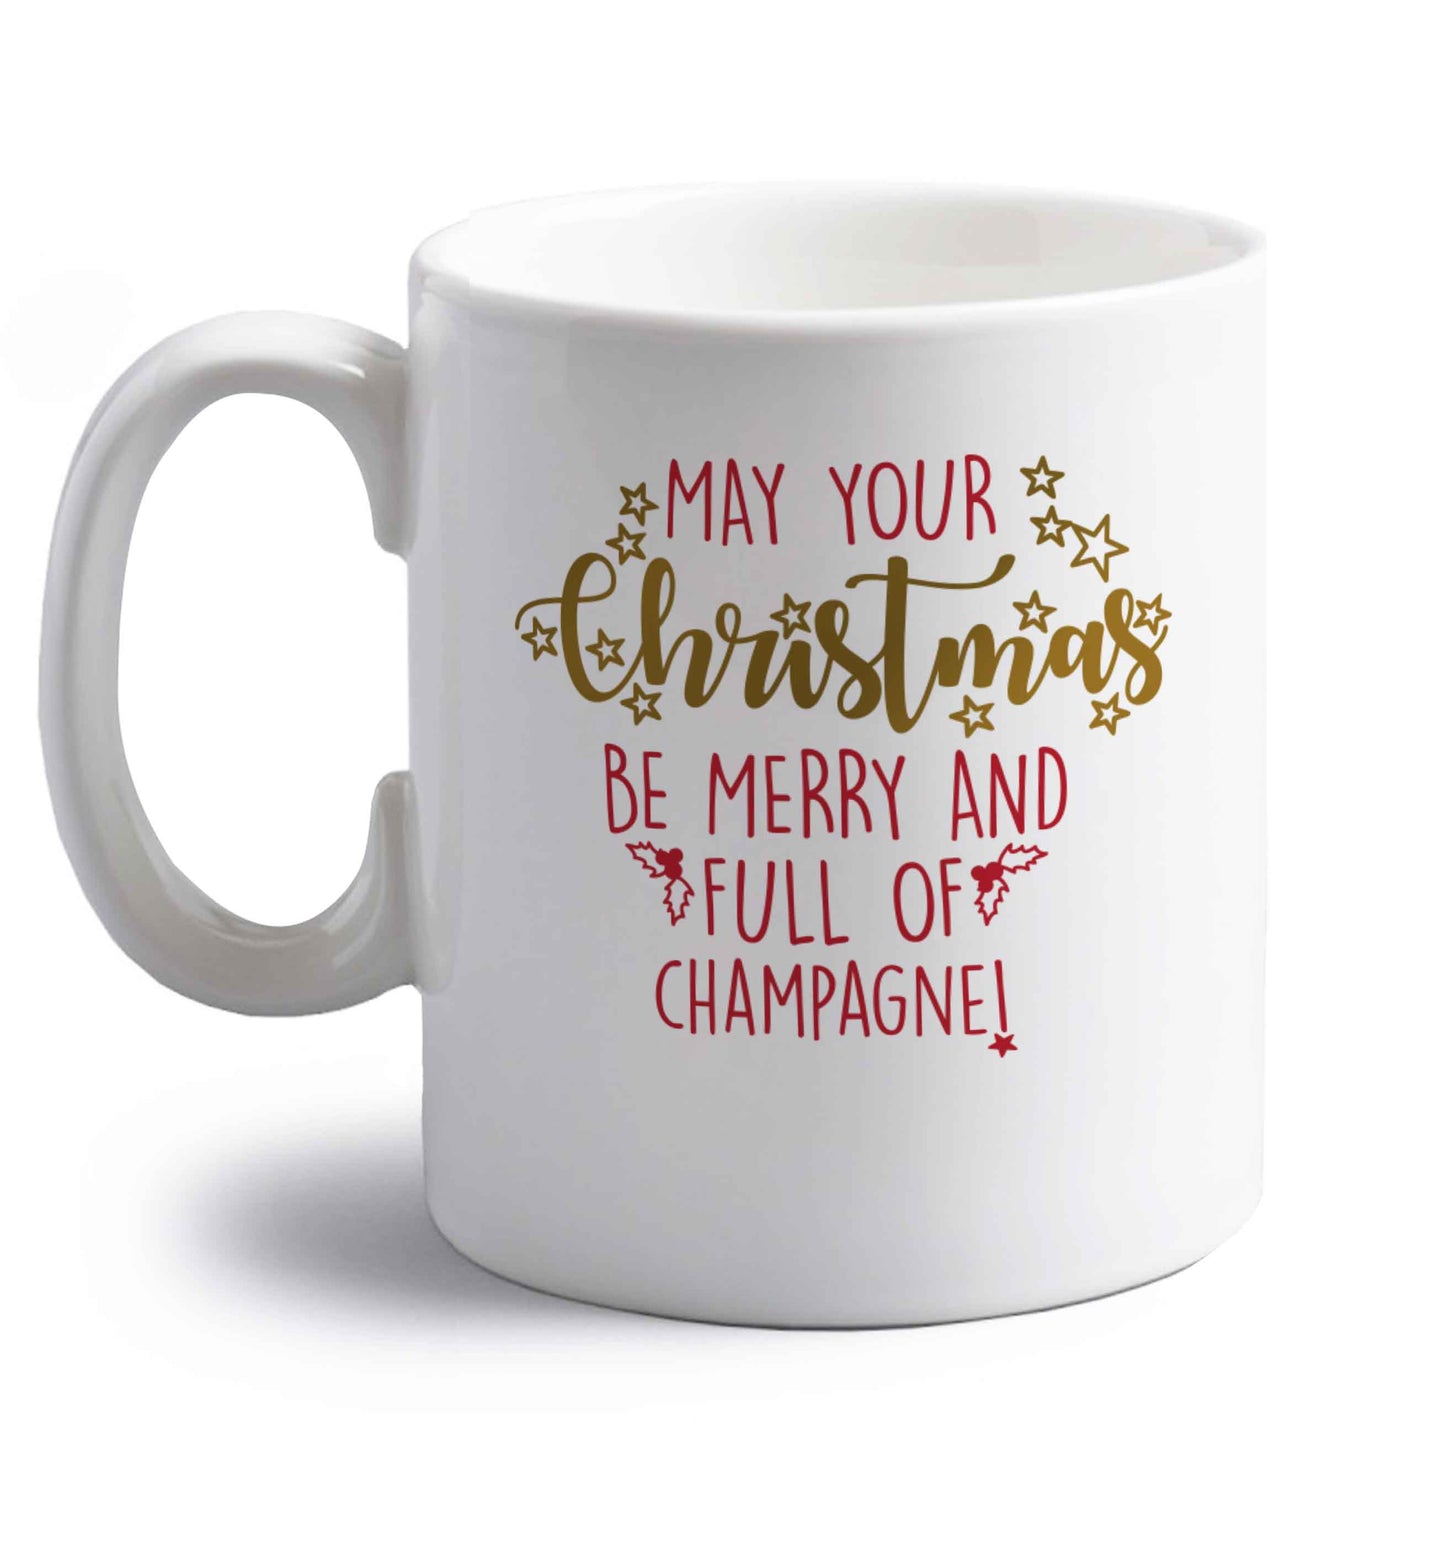 May your Christmas be merry and full of champagne right handed white ceramic mug 